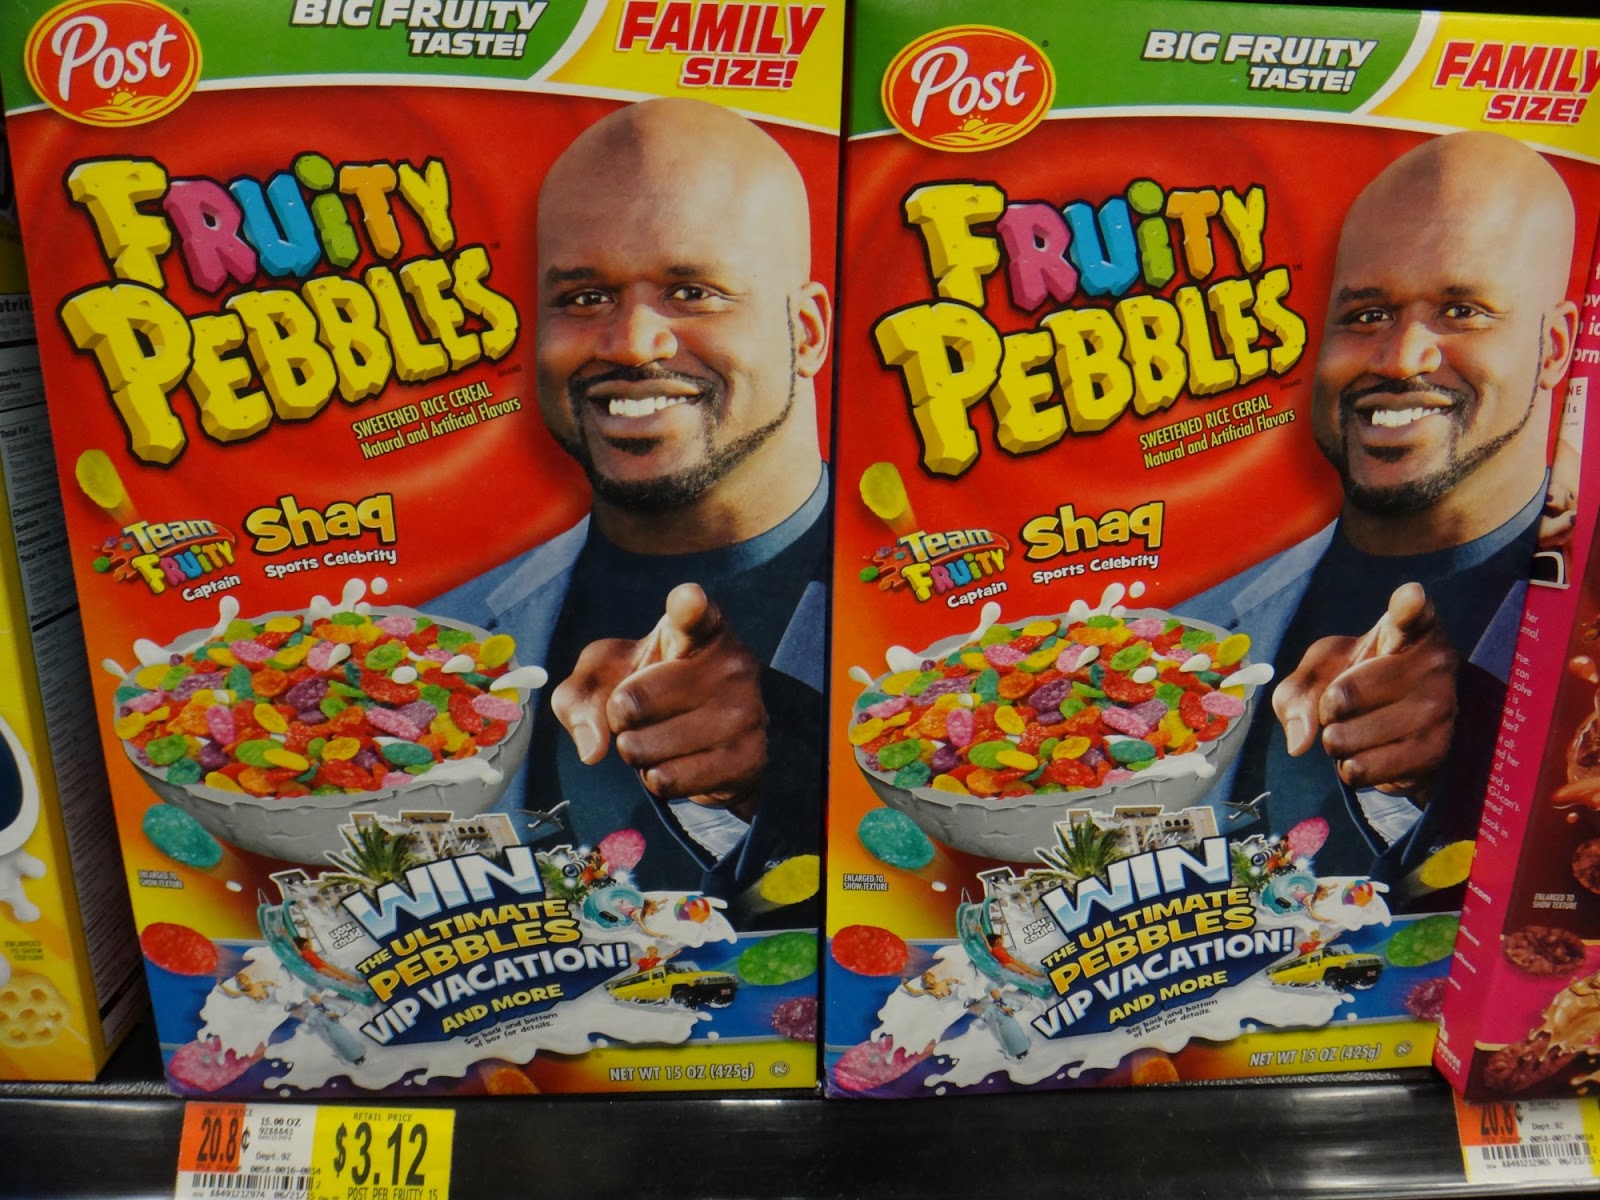 fruity pebbles - Post Big Eruity Taste! Family Size! Post Bic Fruity Family Size! Hty Bruity YEB8L2 Pebbles Fevereen Ecerca Snellere R Mural Porn Shag shaq Sports Cay Sport Clay Ultimate Pebble Vacation Lovacation And More And More Vip Vac 2013 $3.12 Tere